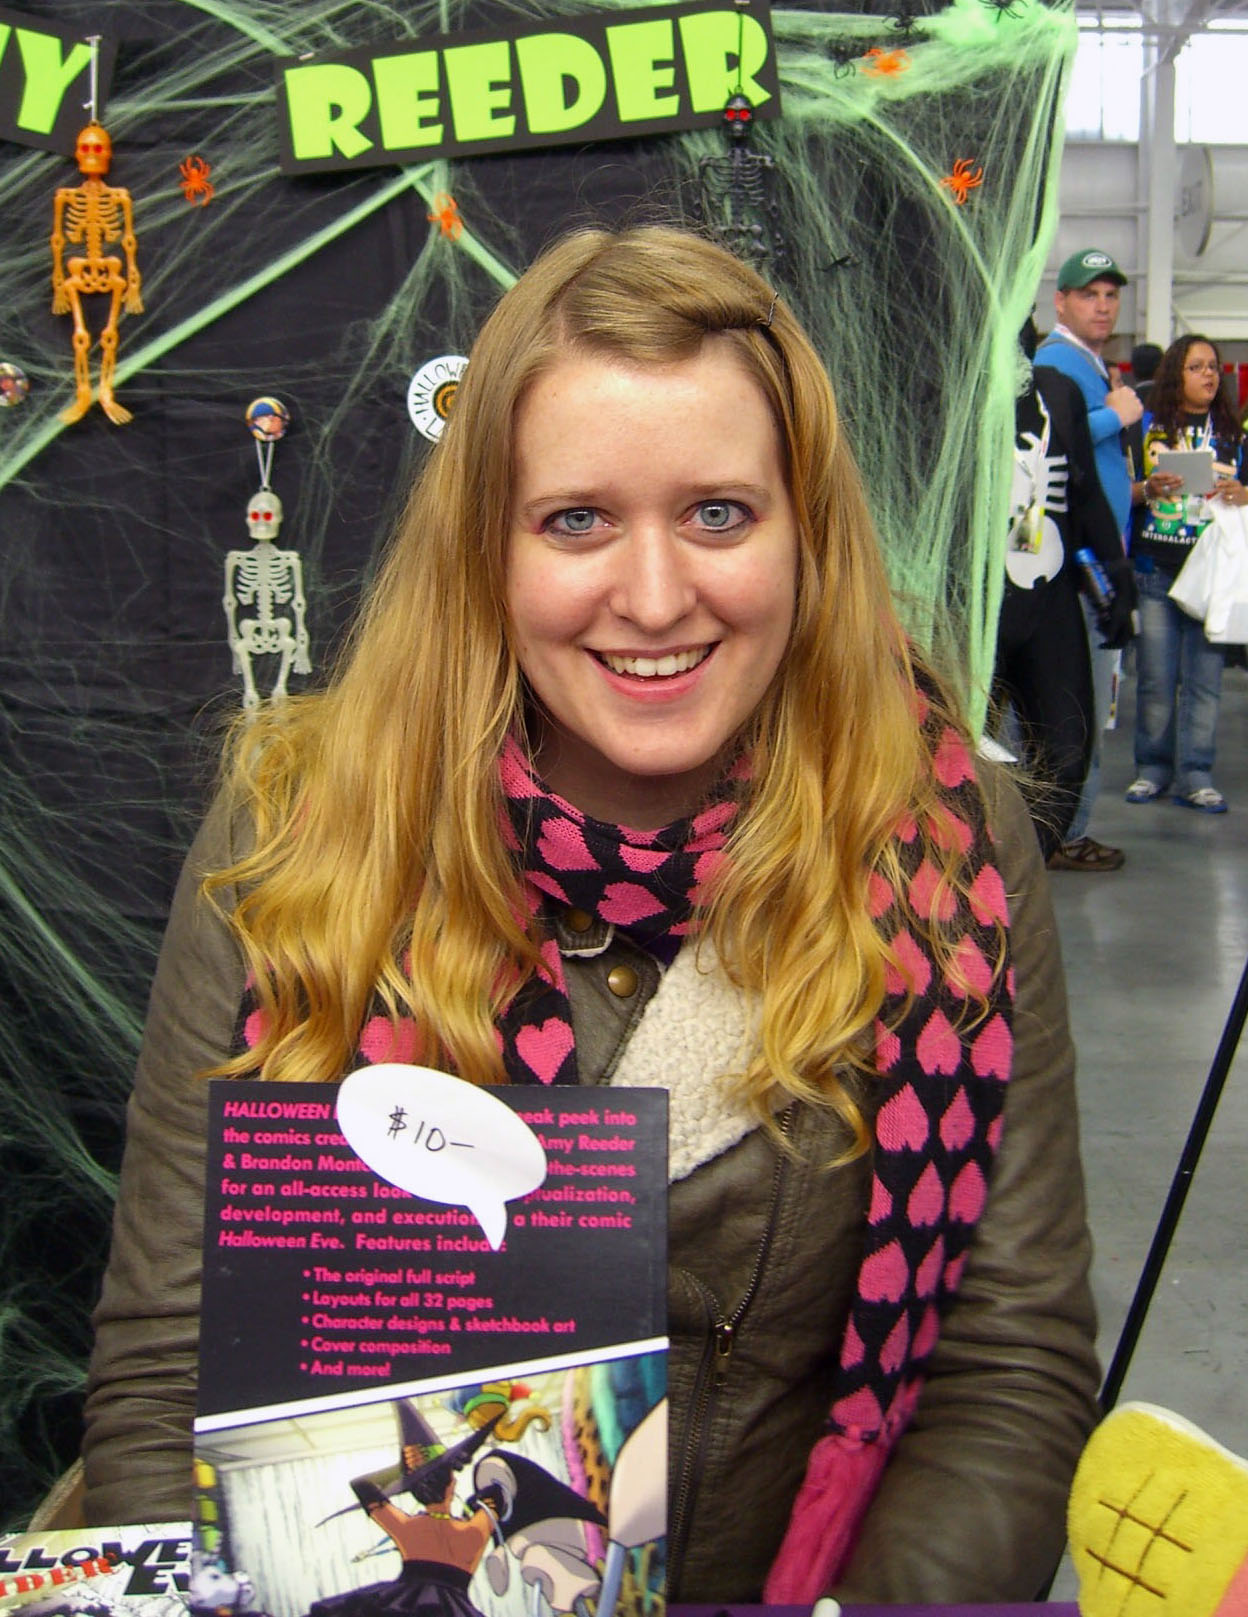 Reeder at the 2012 [[New York Comic Con]].